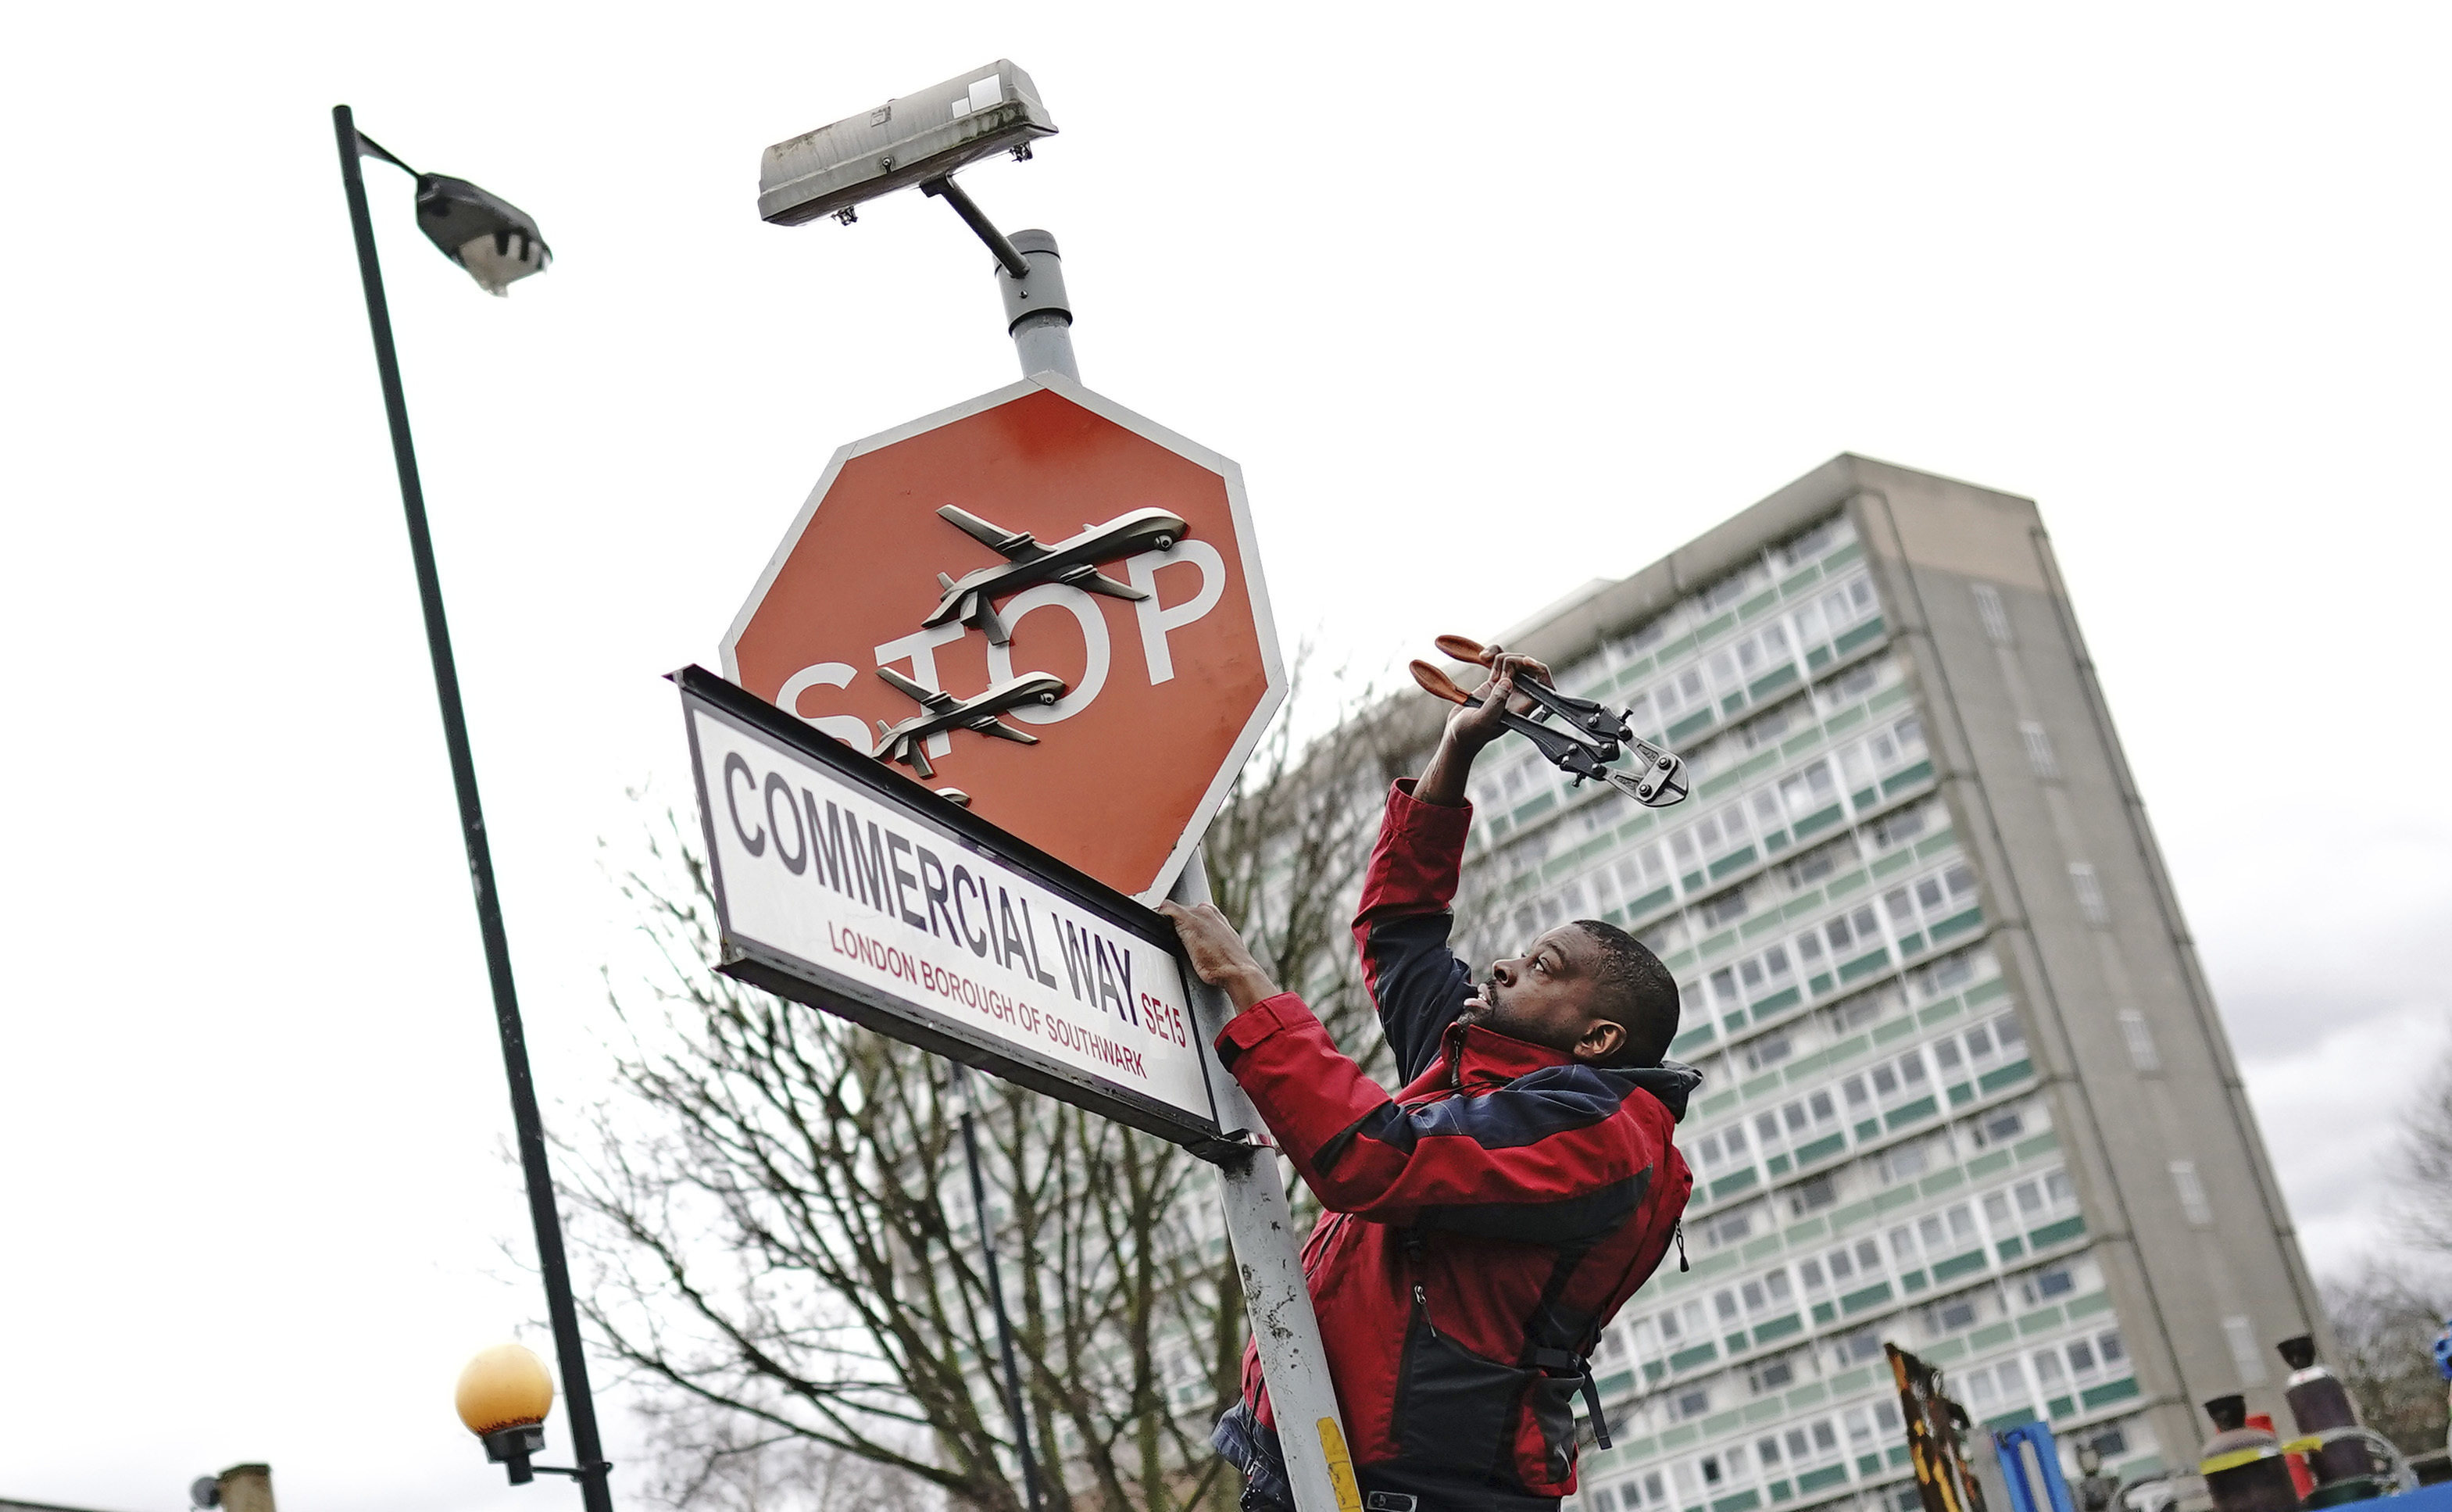 A man removes a piece of art by Banksy from an intersection in London on Friday. Photo: PA via AP